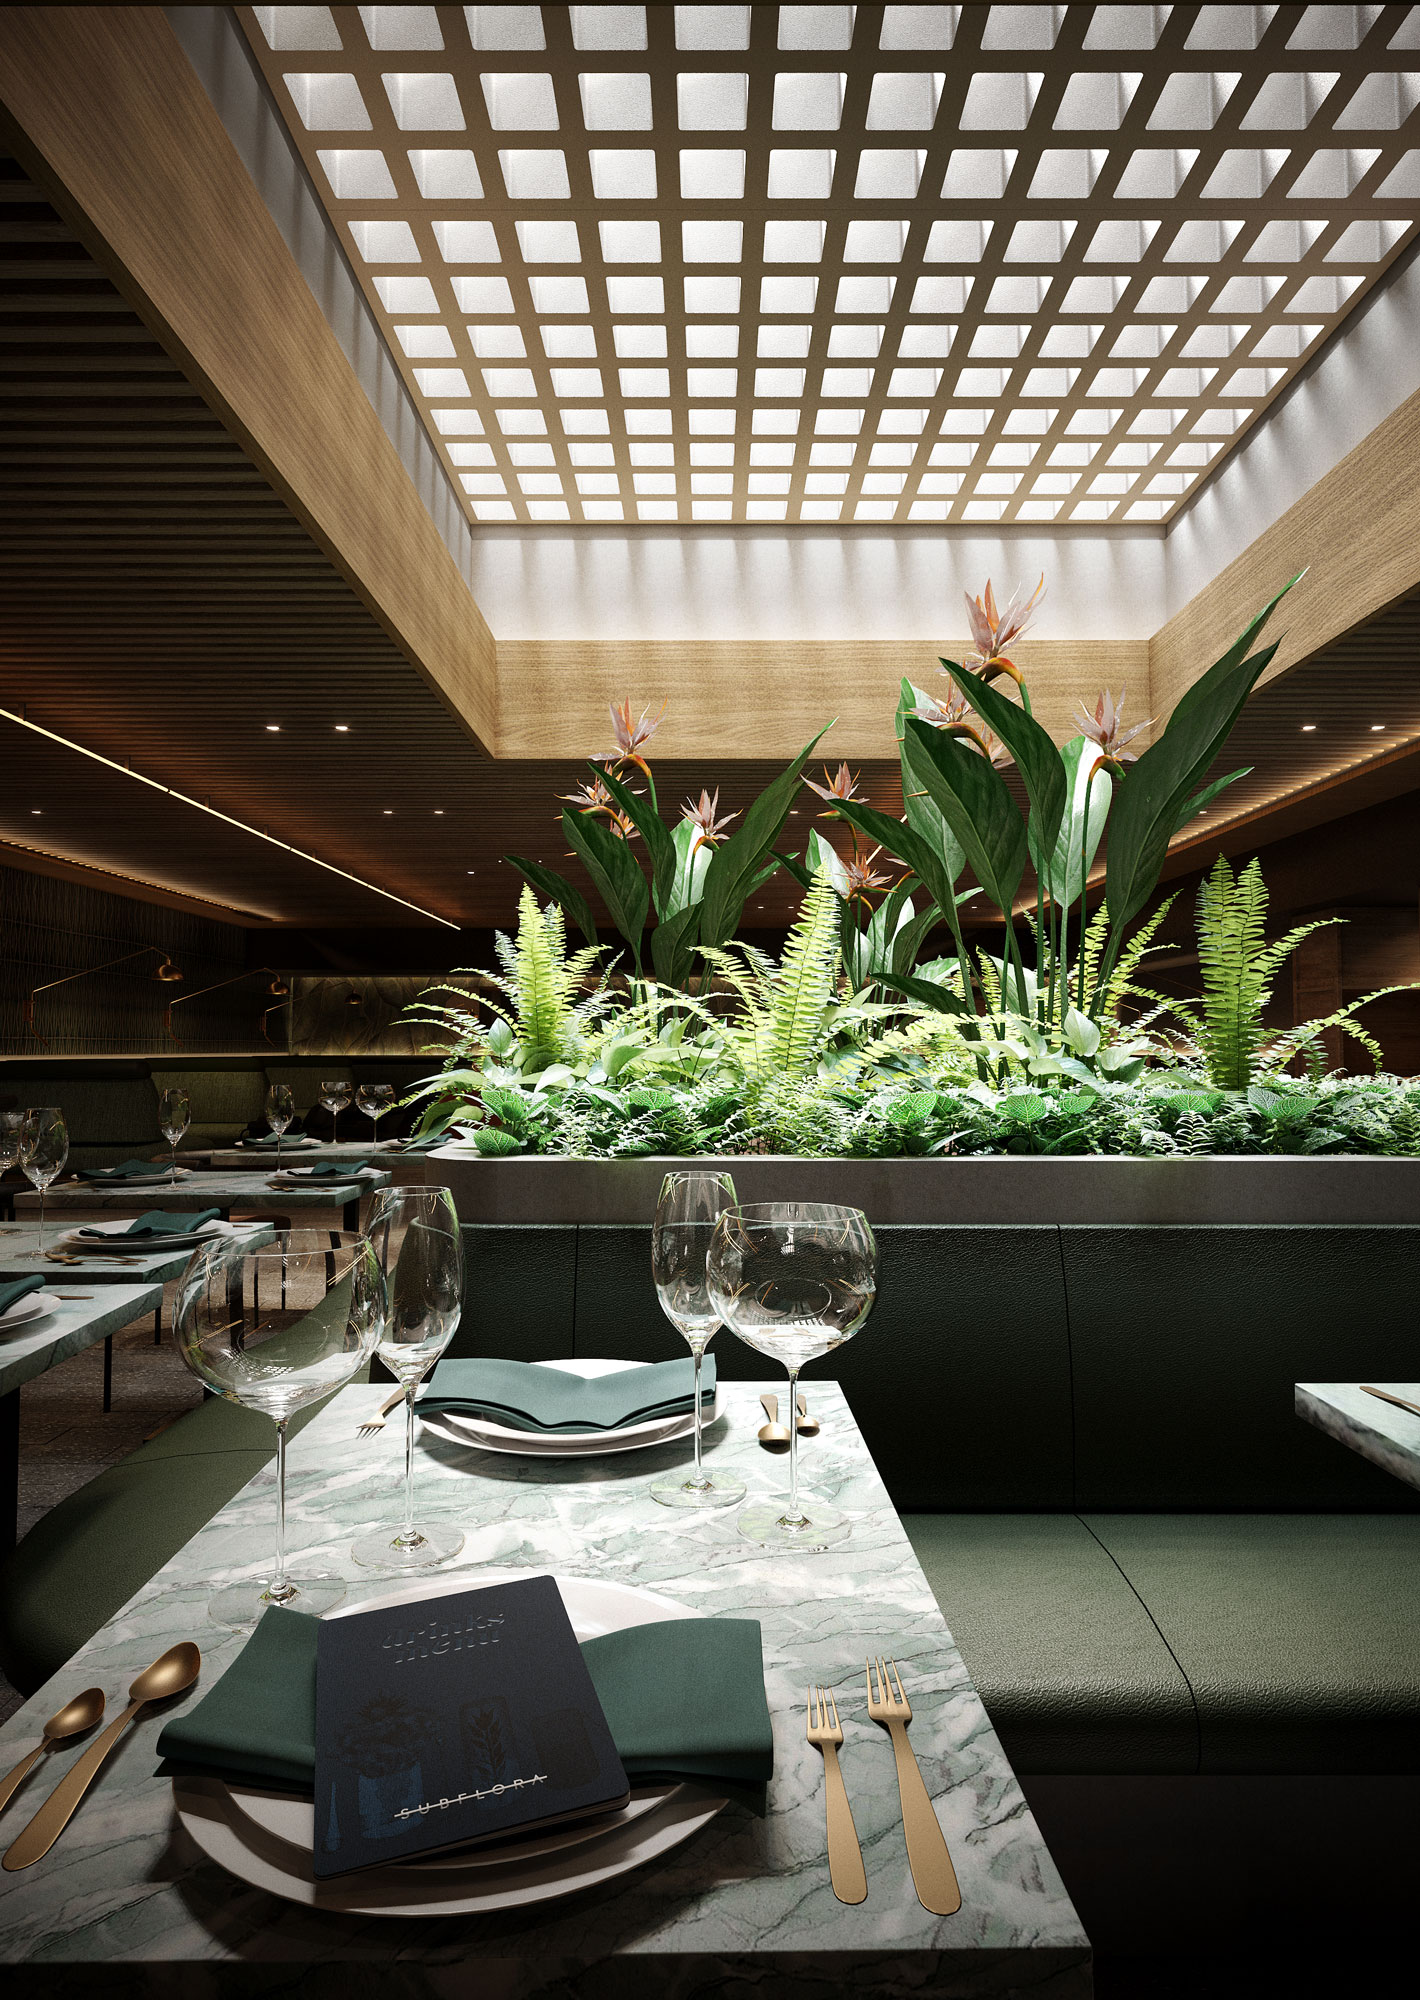 780 3rd Ave Restaurant by YMAGES. Architect visualization and design.